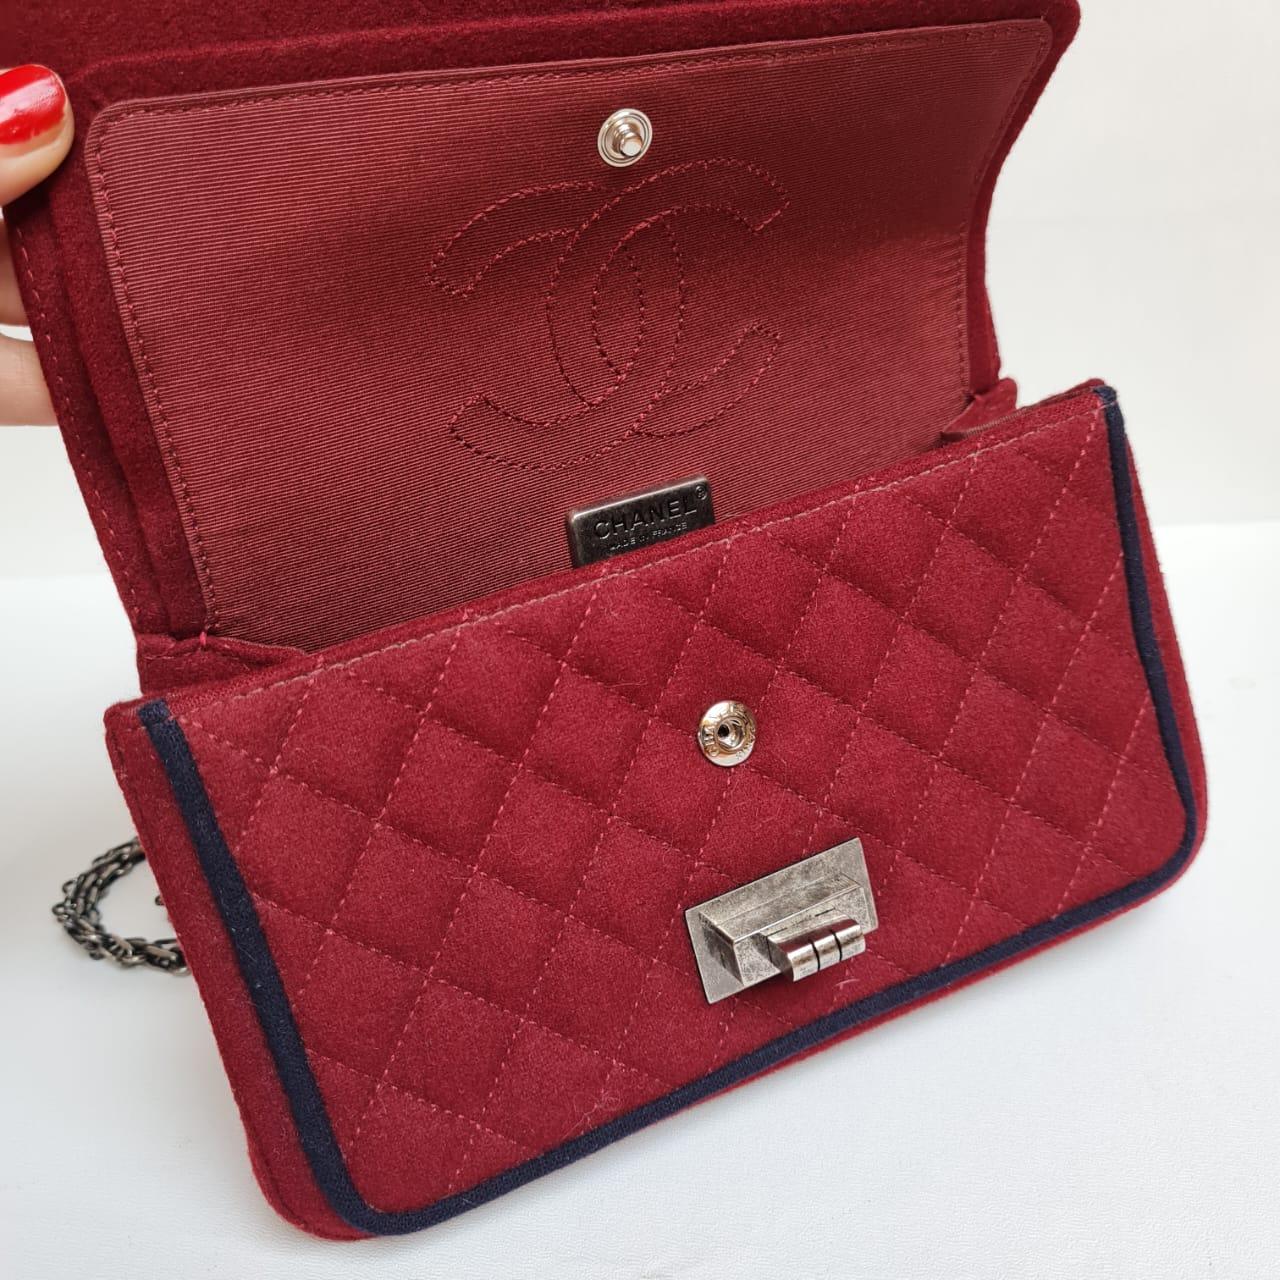 Chanel 2015 Red Edelweiss Reissue Wool Flap Bag For Sale 12